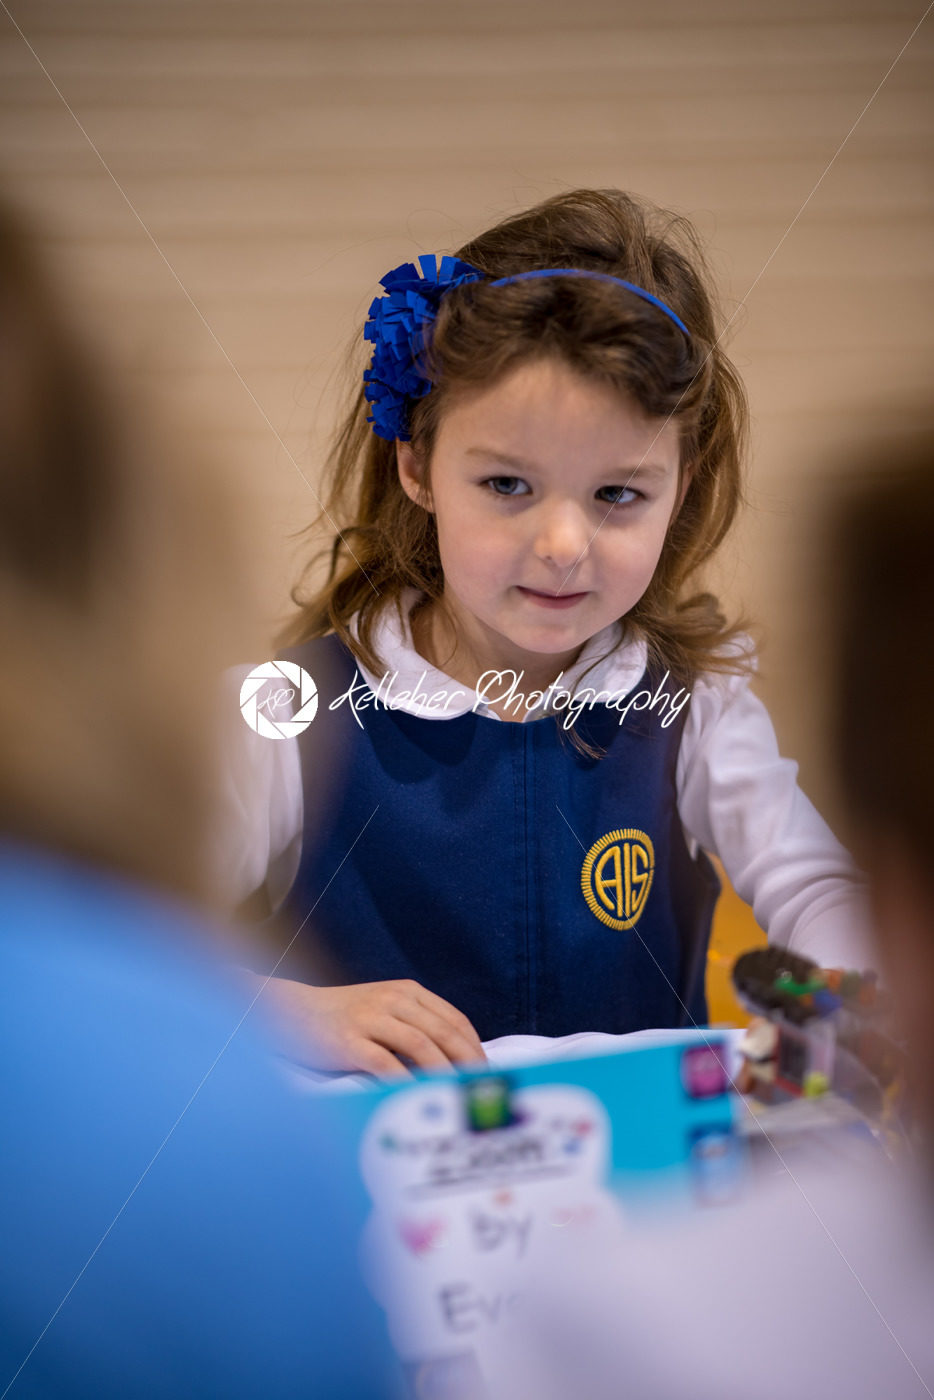 Rosemont, PA – March 20, 2018: The Agnes Irwin School Kindergarten Invention Convention - Kelleher Photography Store